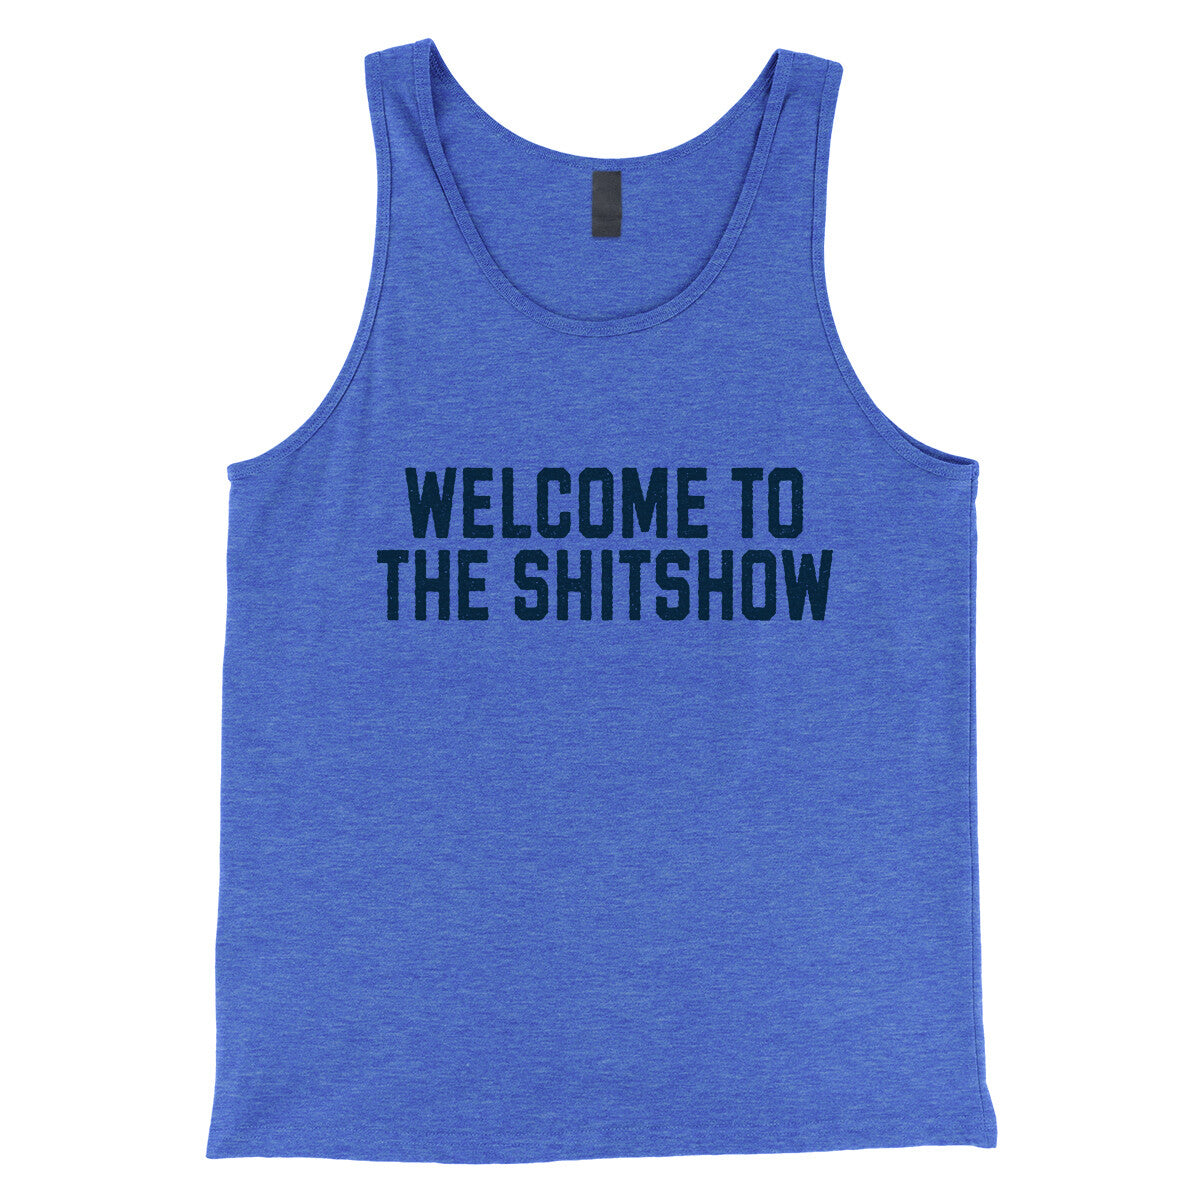 Welcome to the Shit Show in True Royal TriBlend Color